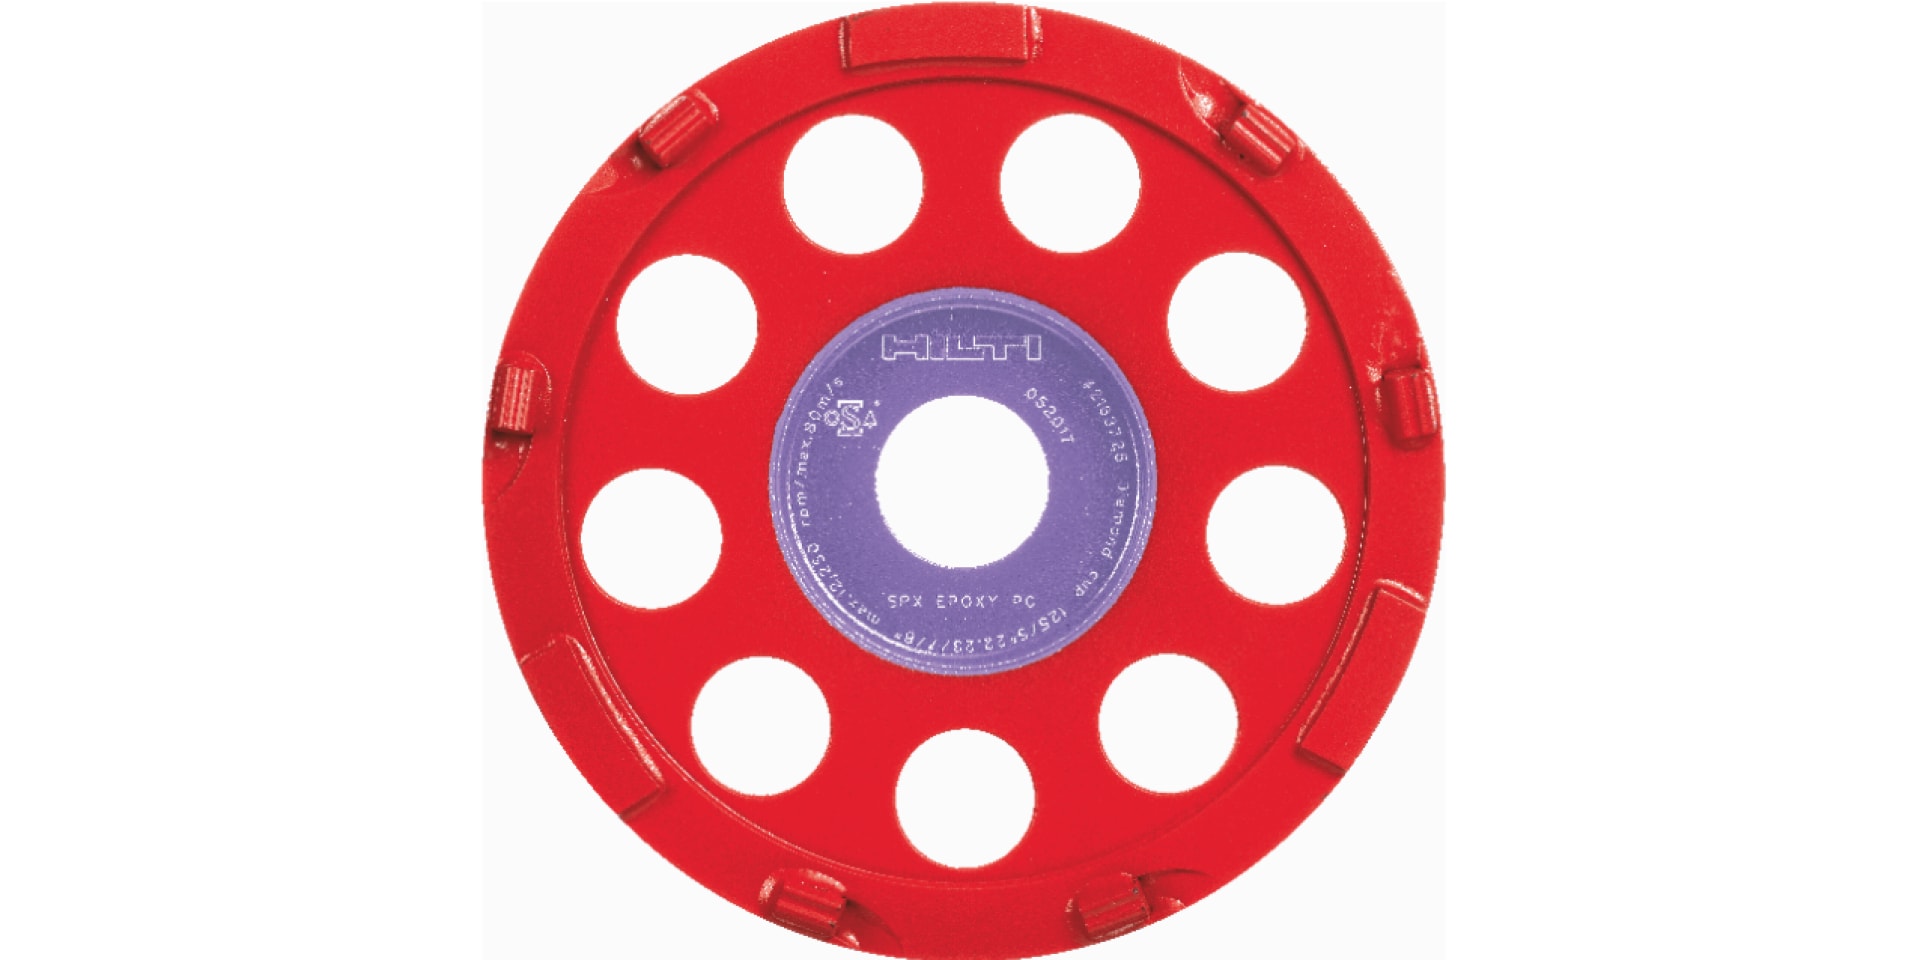 Ultimate diamond cup wheel for removing all types of thick coatings including polyurethane, epoxy and plastics